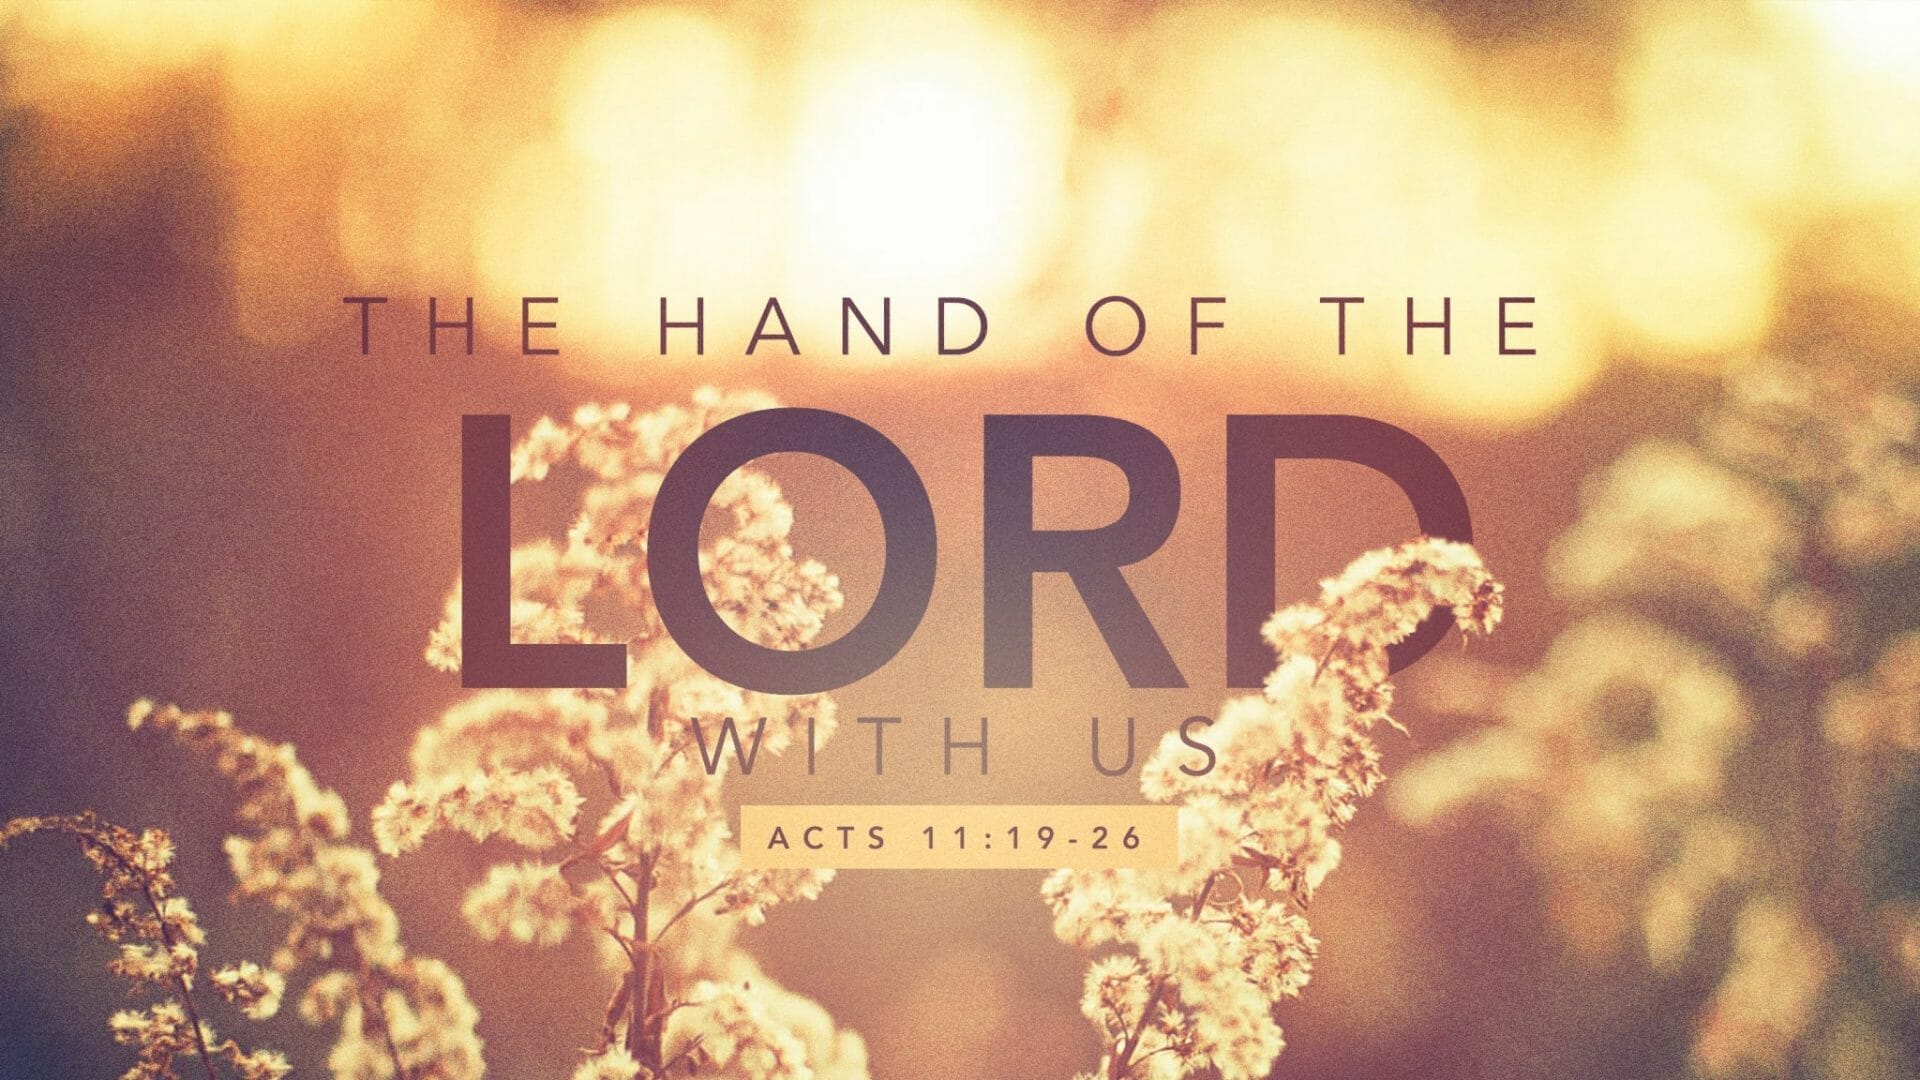 the hand of the lord, god's great power, god's anointing, acts 2 42, committed to jesus, disciple